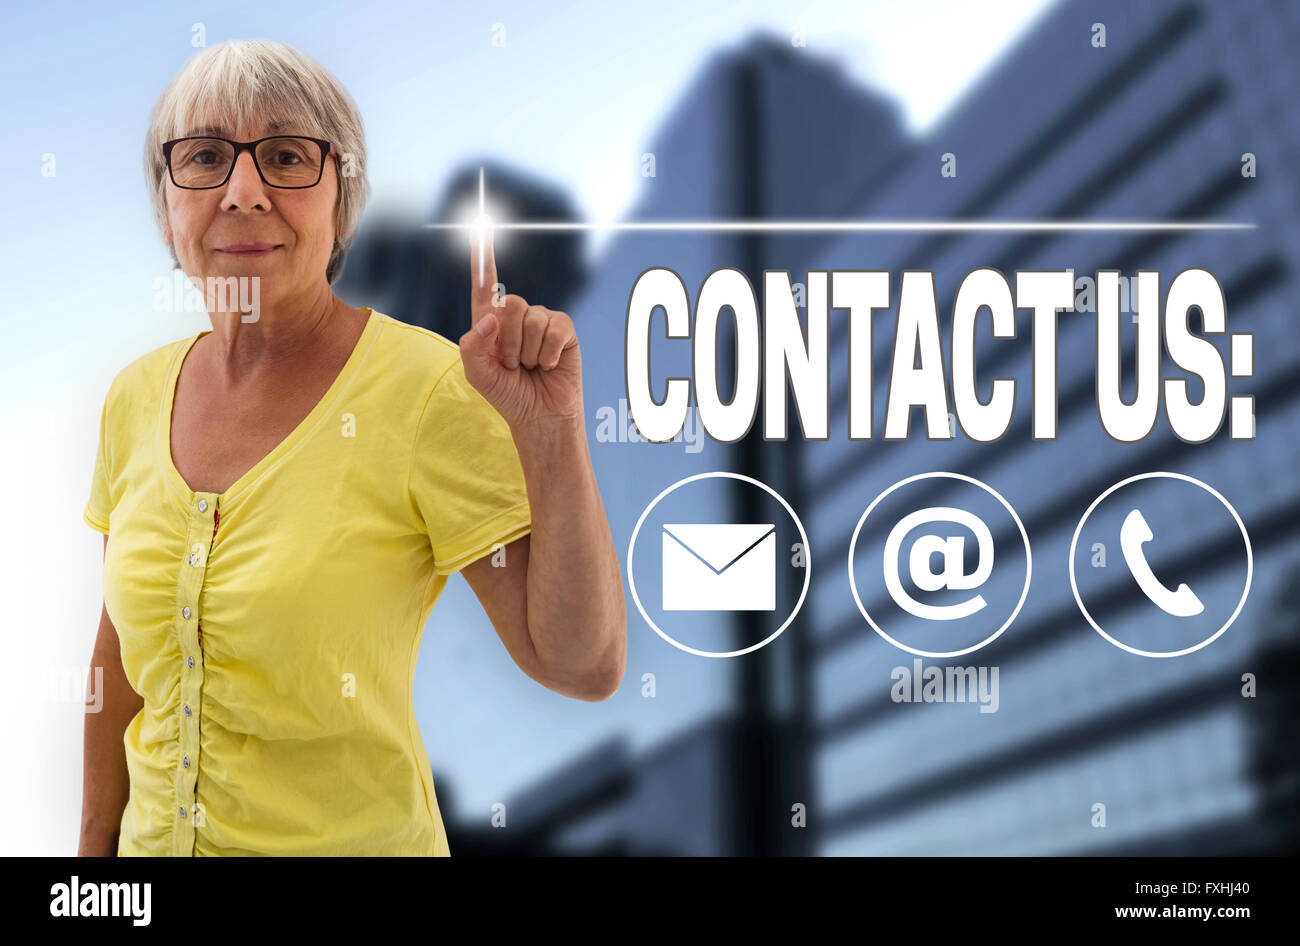 contact us touchscreen is shown by senior women. Stock Photo